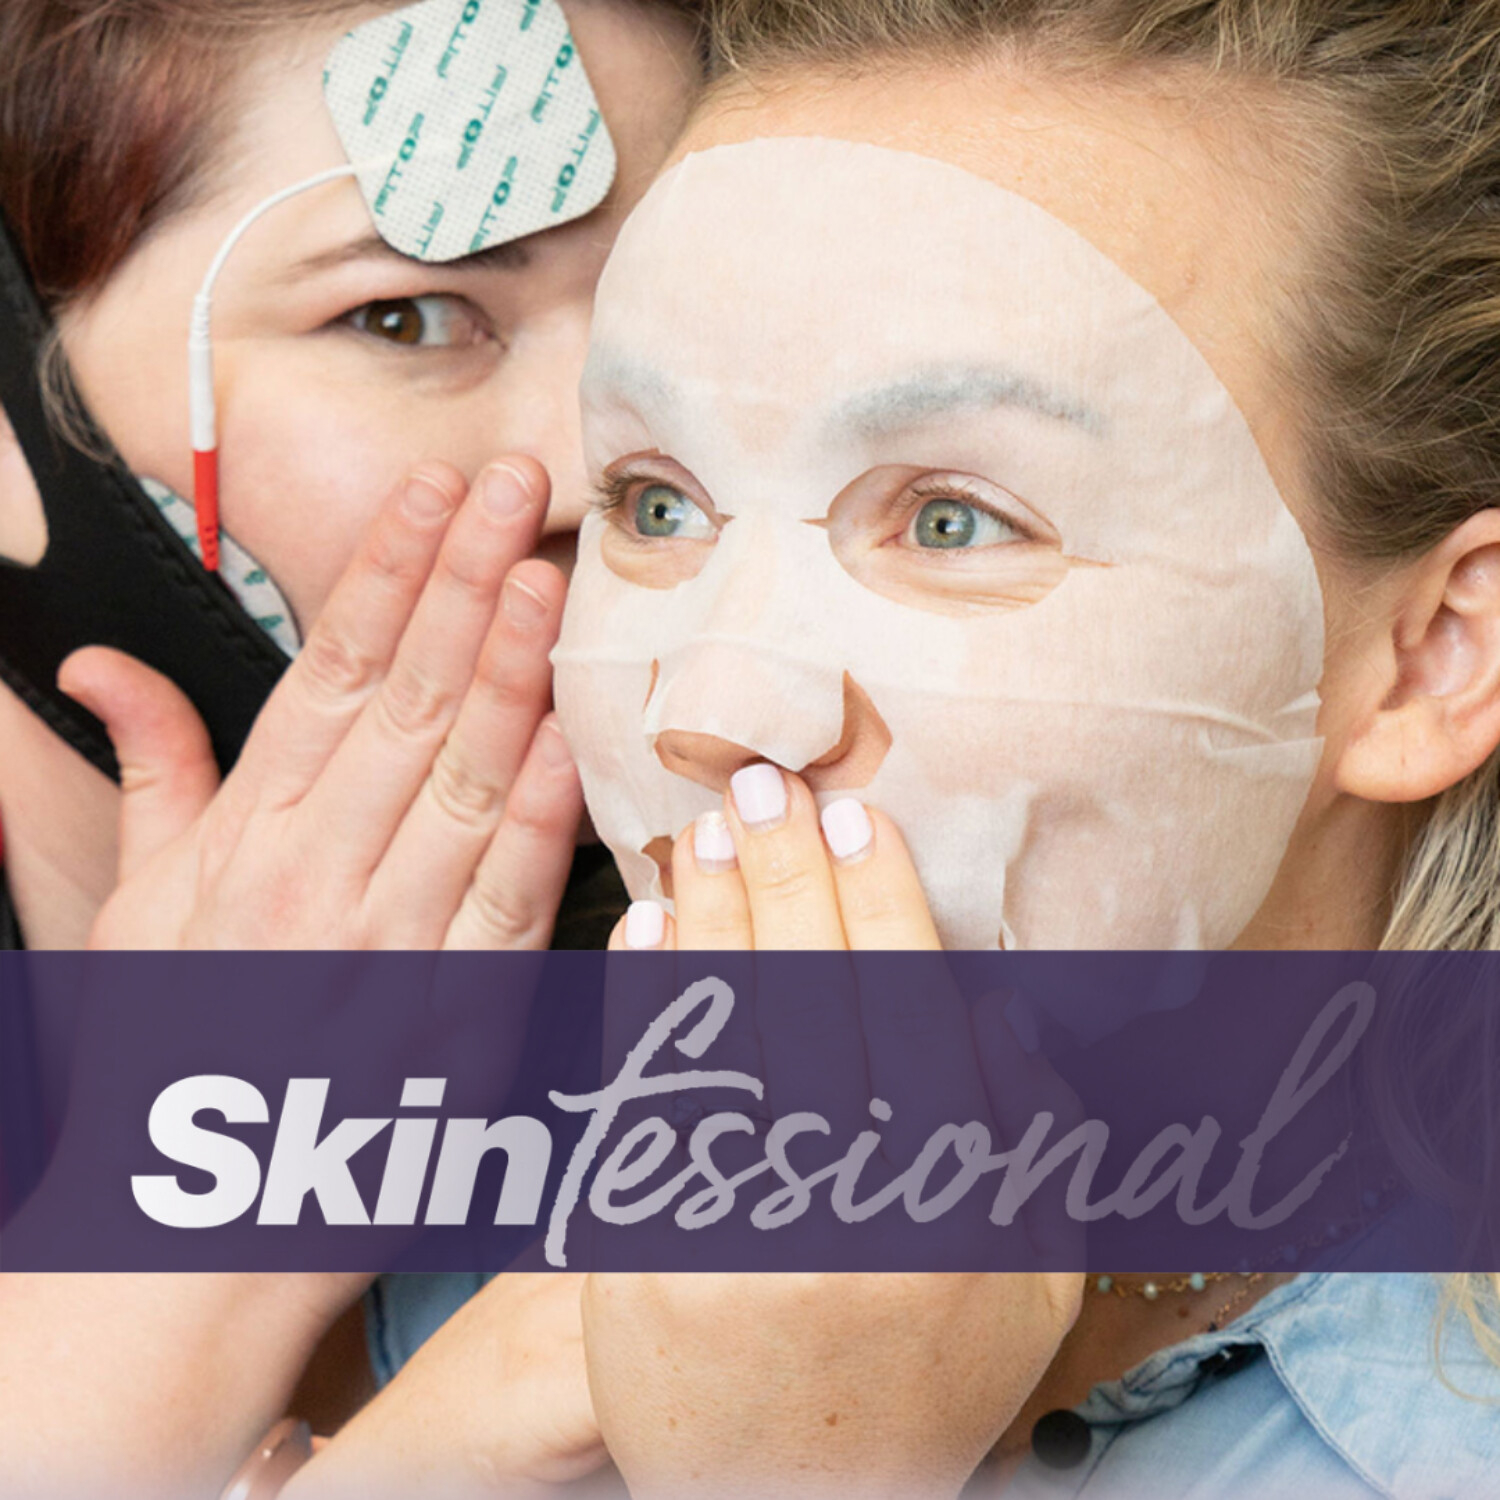 Skinfessional